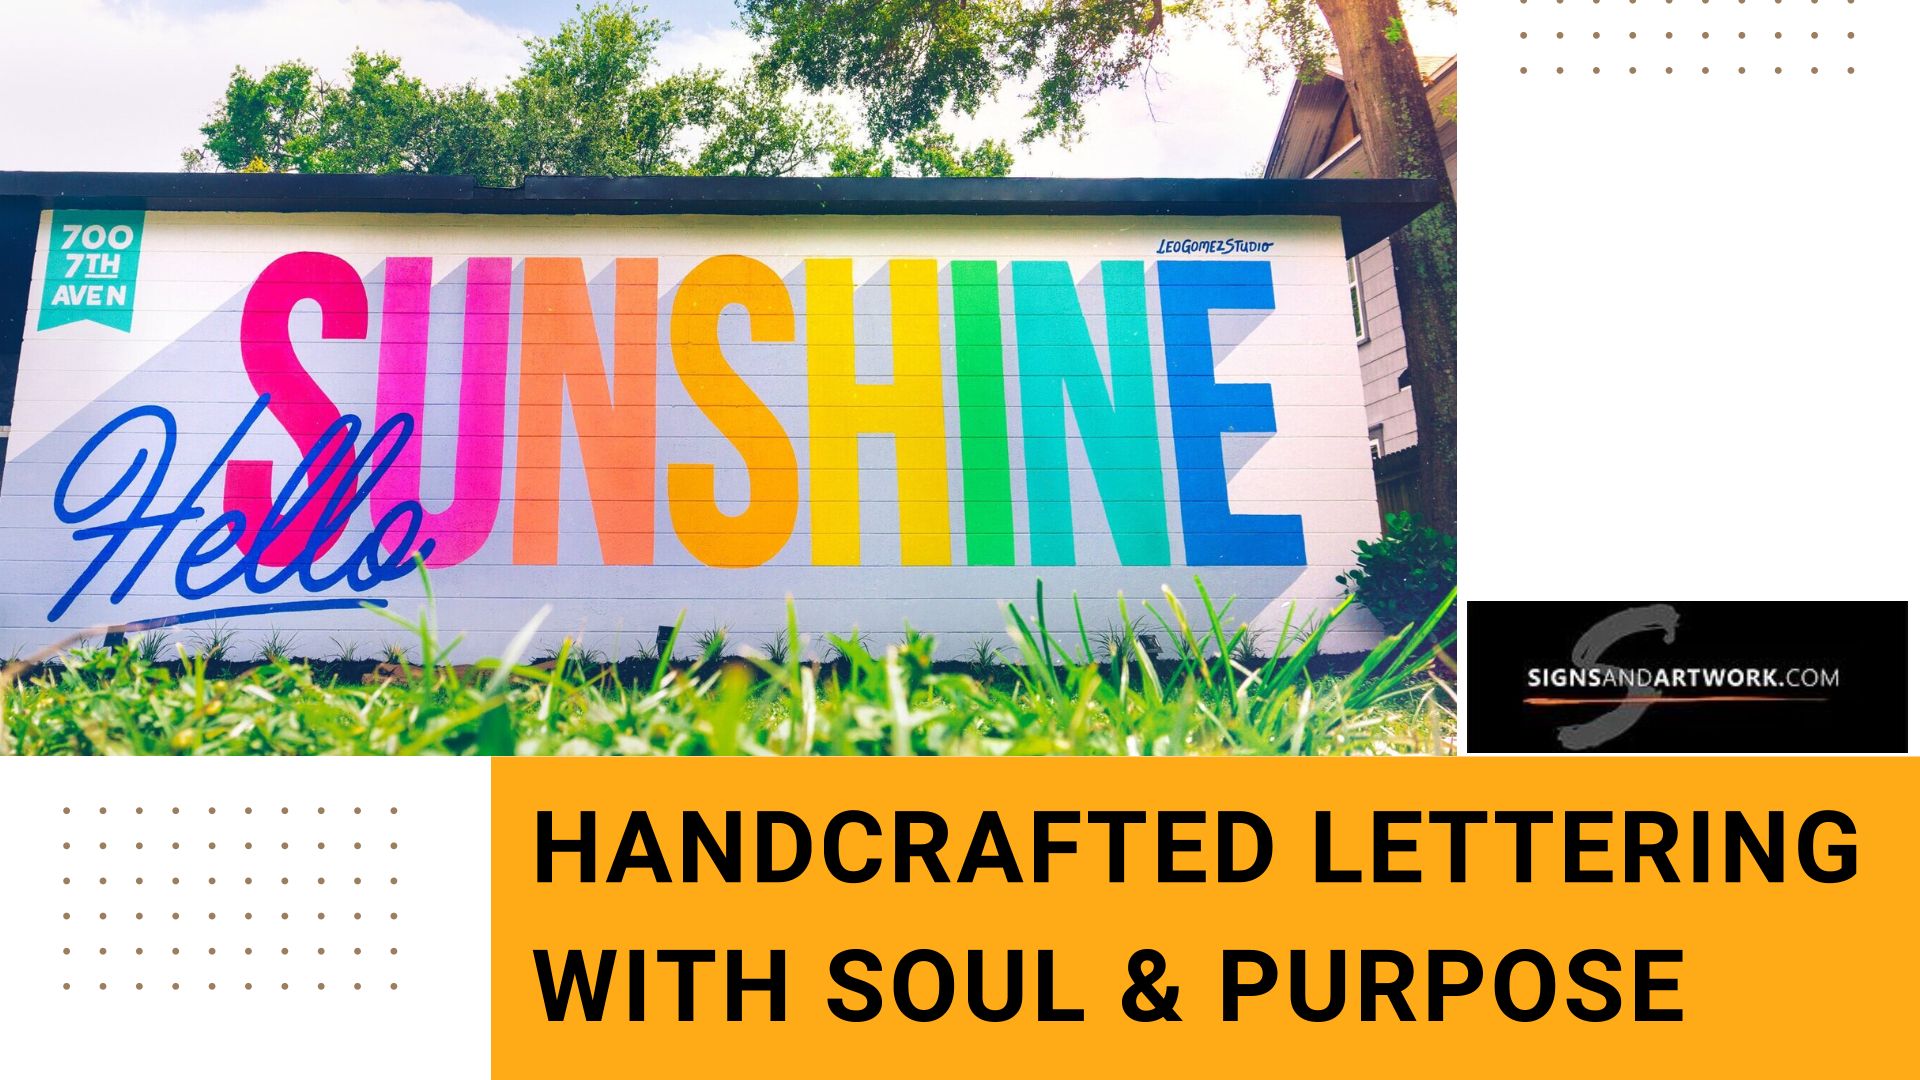 HANDCRAFTED LETTERING WITH SOUL & PURPOSE